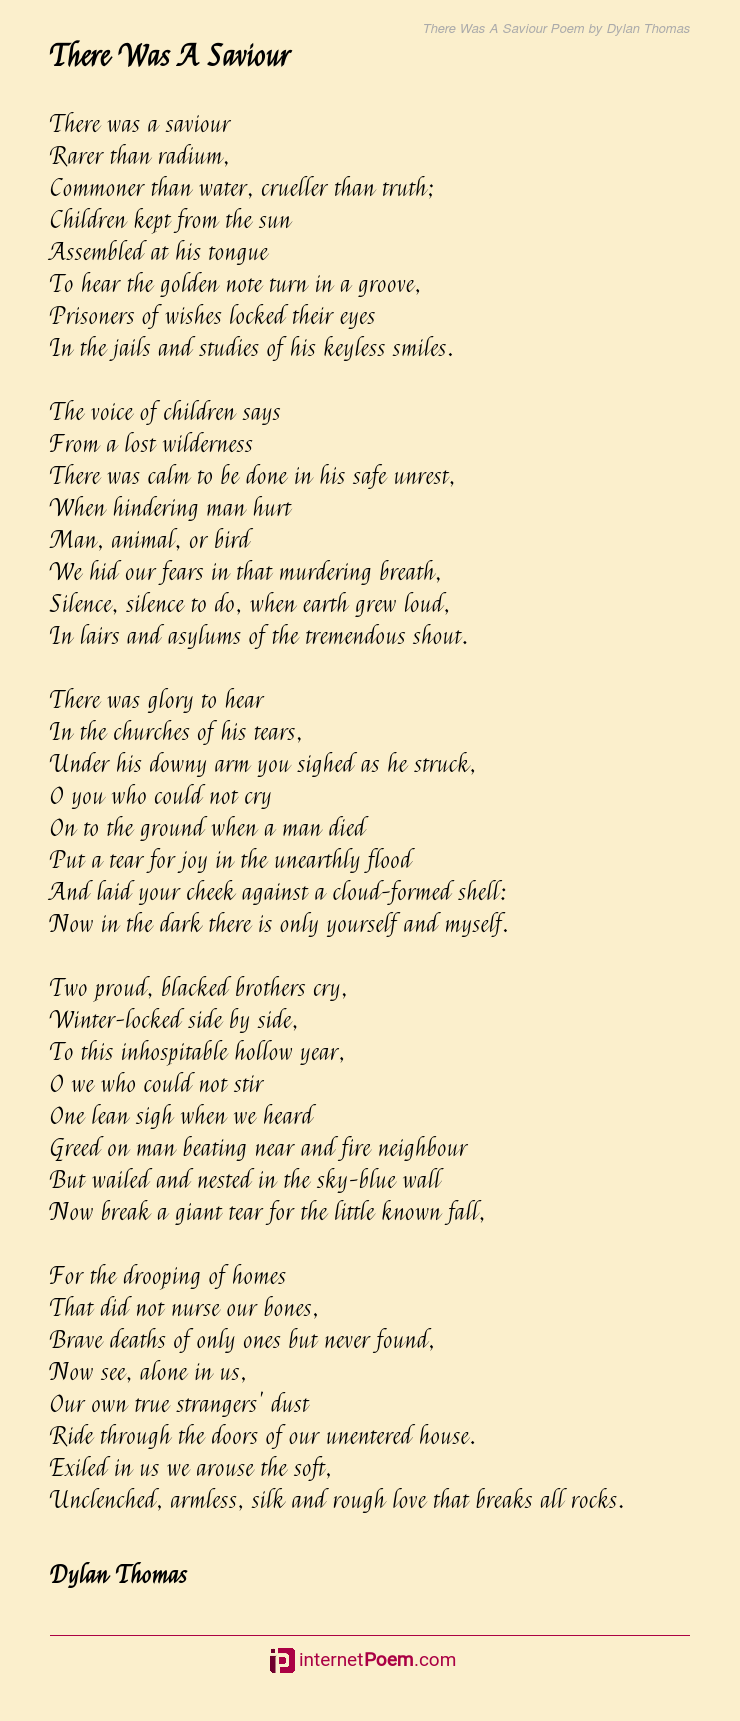 There Was A Saviour Poem by Dylan Thomas